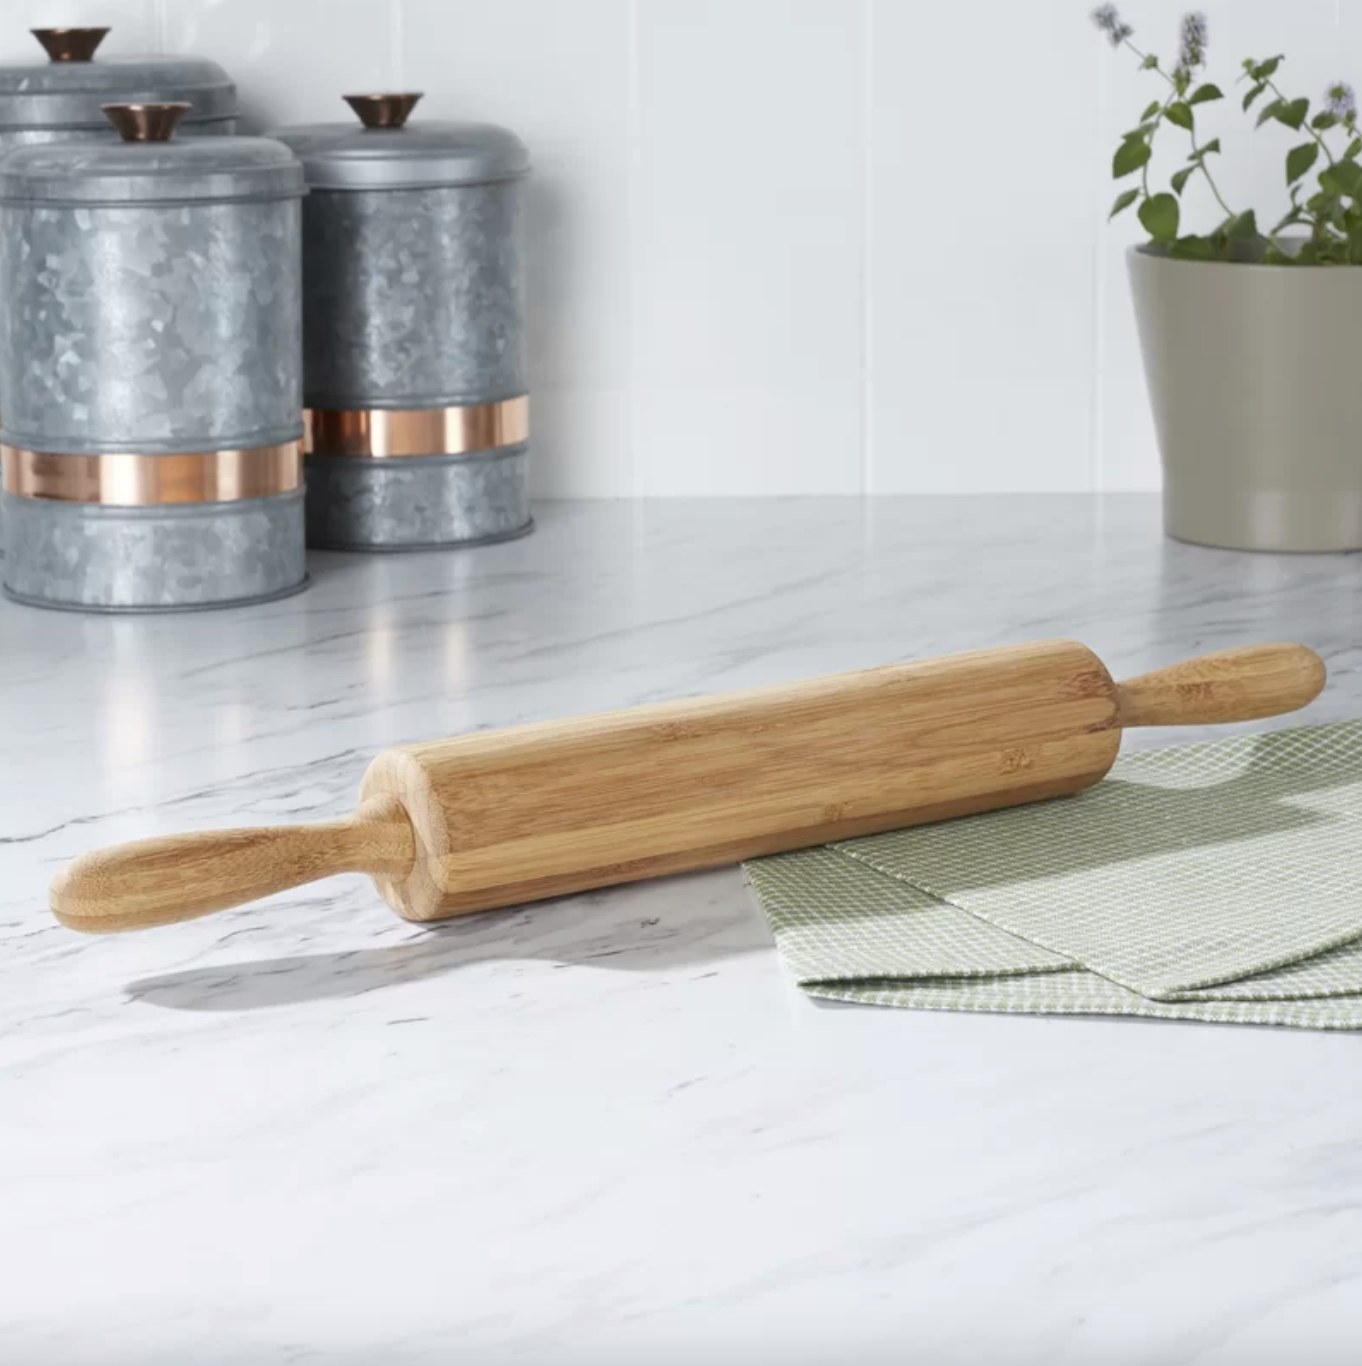 the wooden rolling pin on a decorated counter